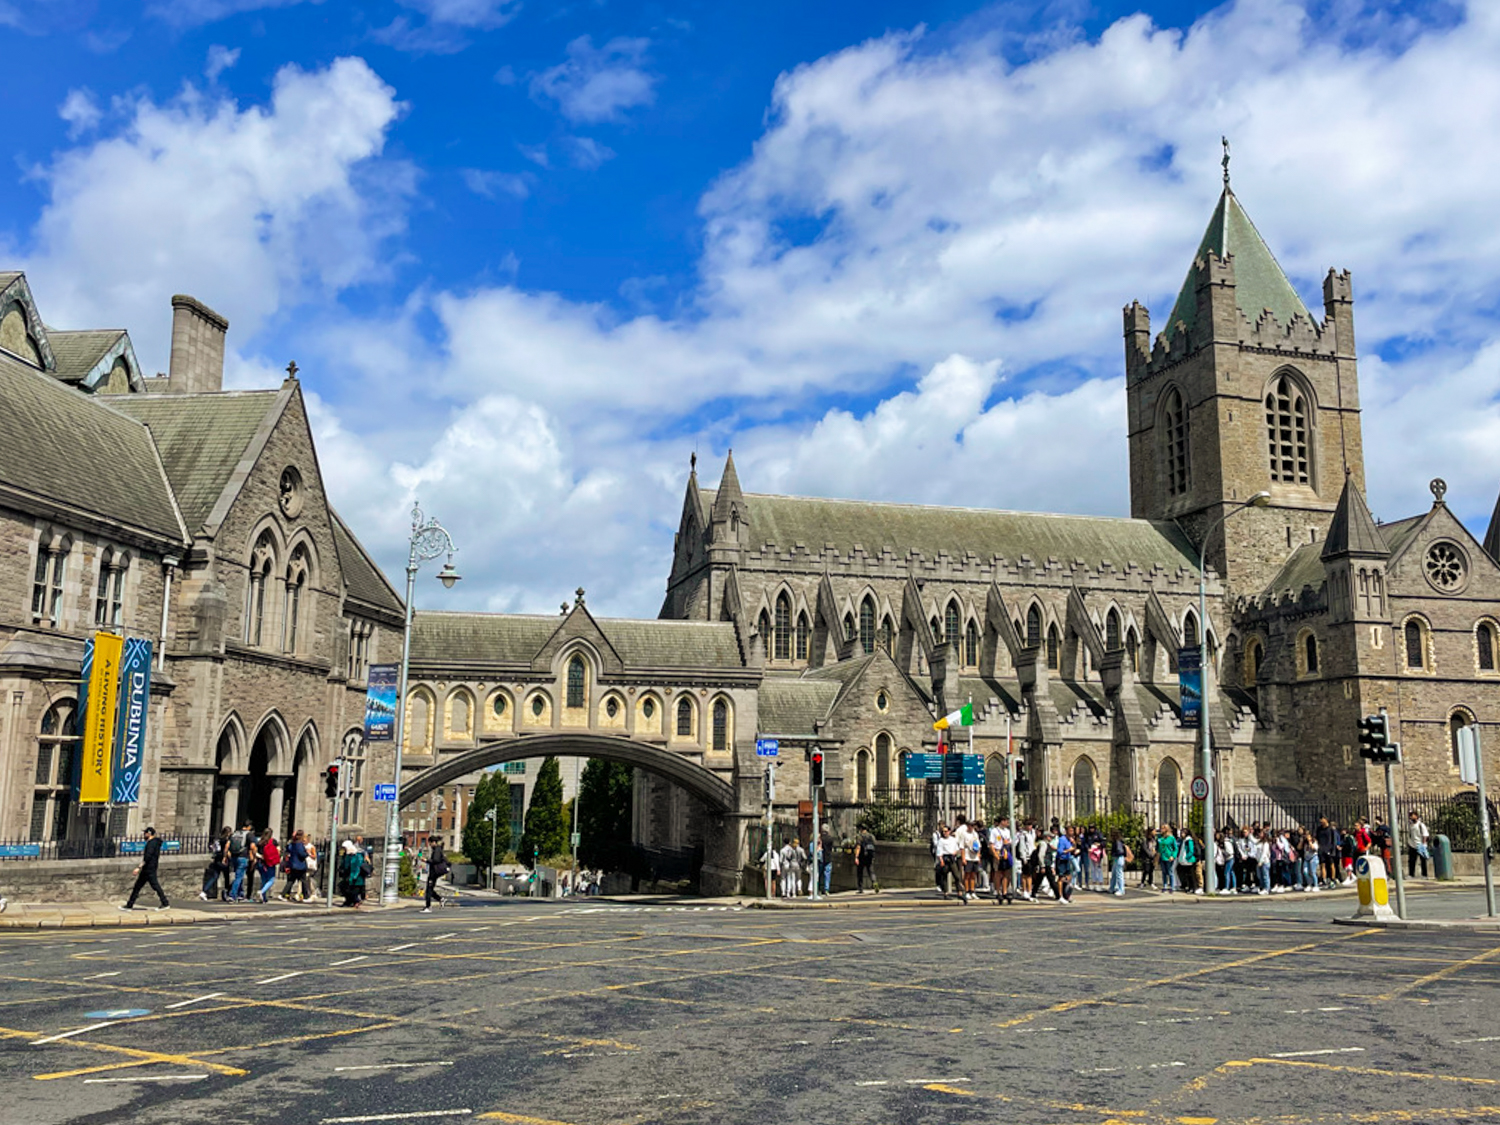 The old-looking Christ Church cathedral beside a major road. A covered stone bridge archway links the cathedral over a smaller road, allowing pedestrians to pass over top of it.